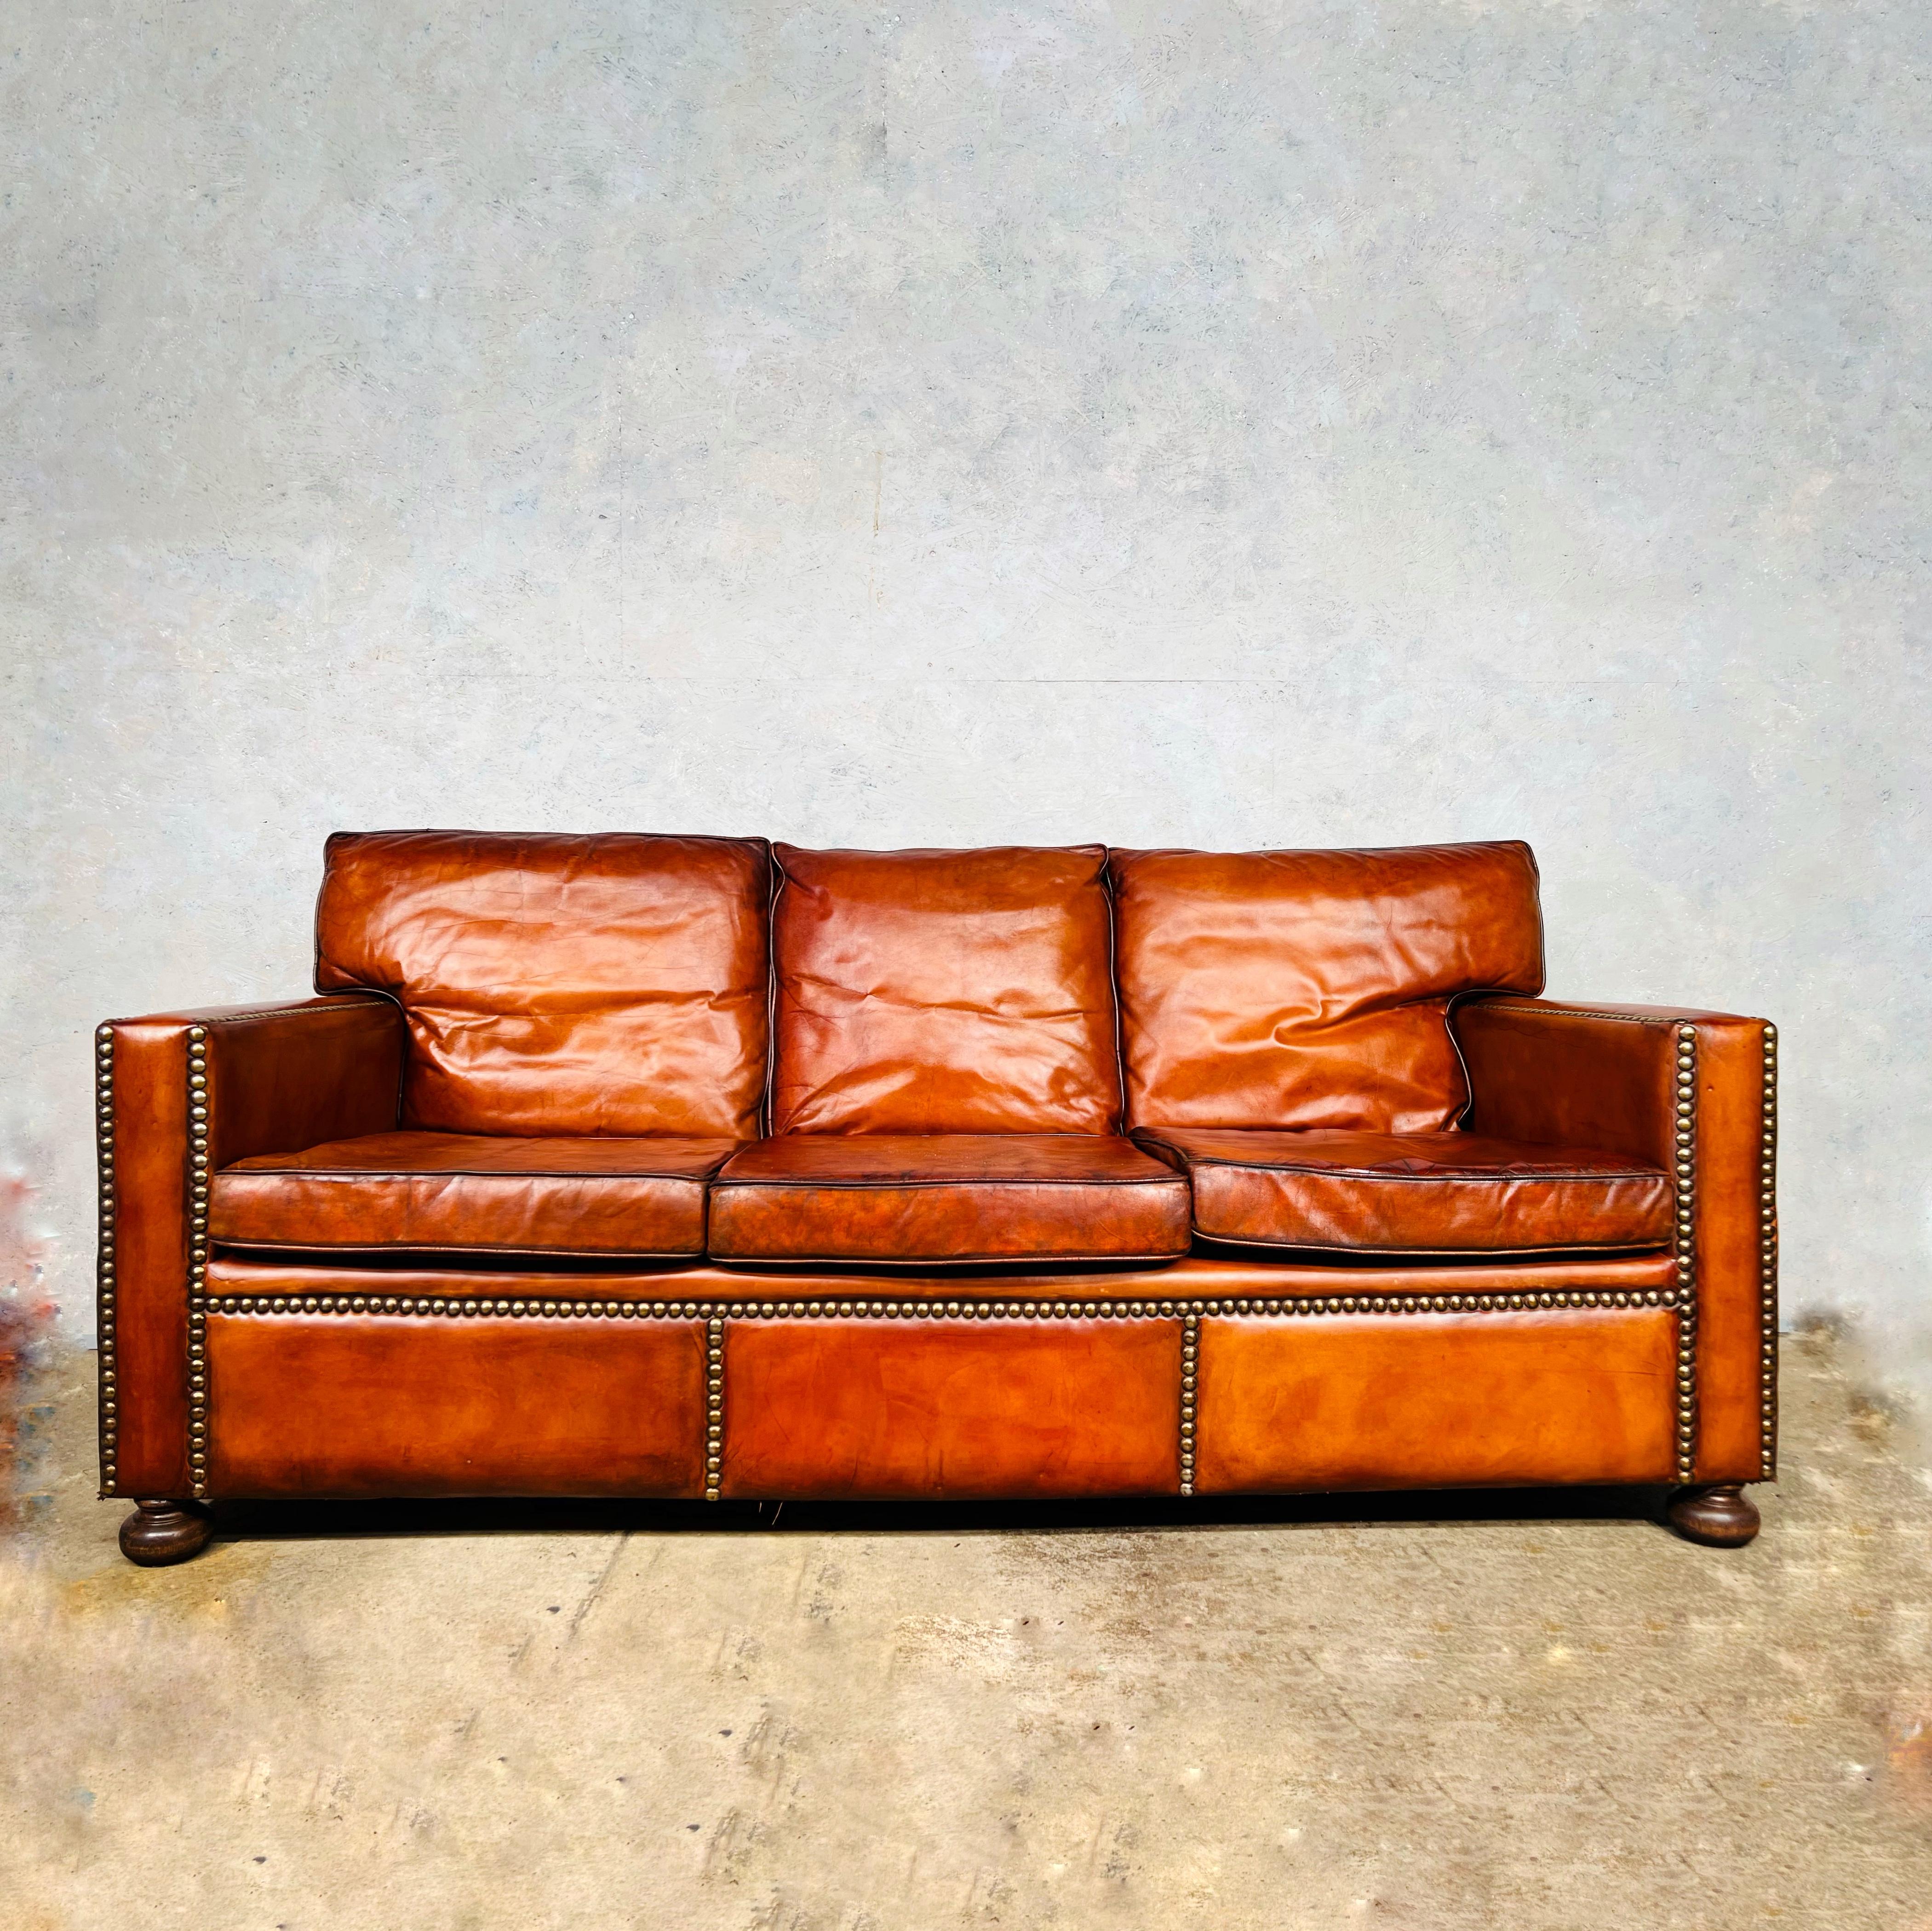 Stunning English midcentury chestnut brown leather studded three seater sofa.

Very stylish with a beautiful shape with great quality leather and feather filled cushions, in great vintage condition, restored and hand dyed a beautiful tan colour